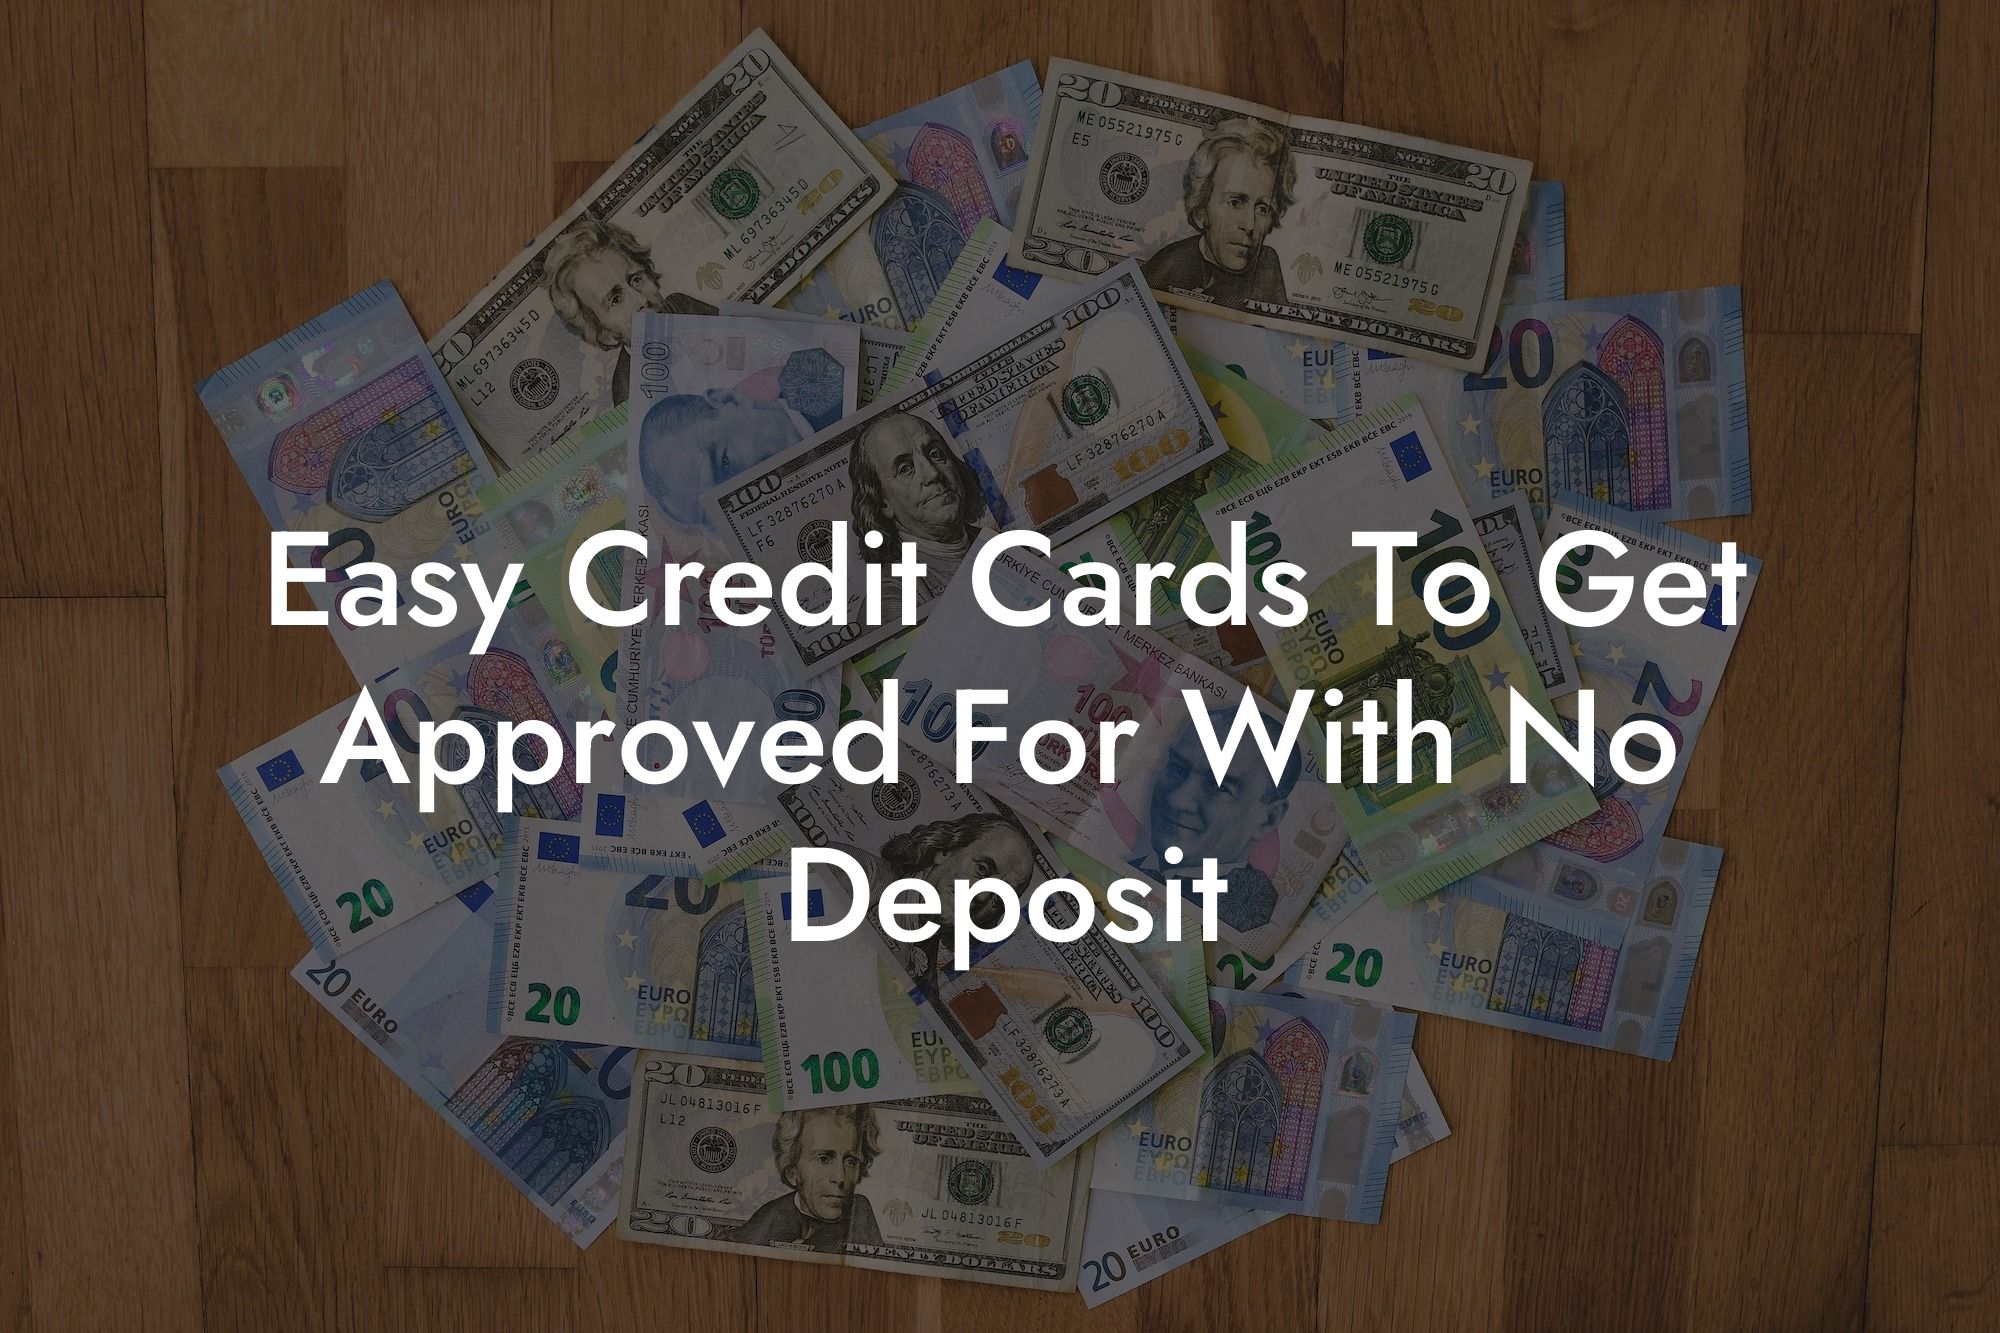 Easy Credit Cards To Get Approved For With No Deposit